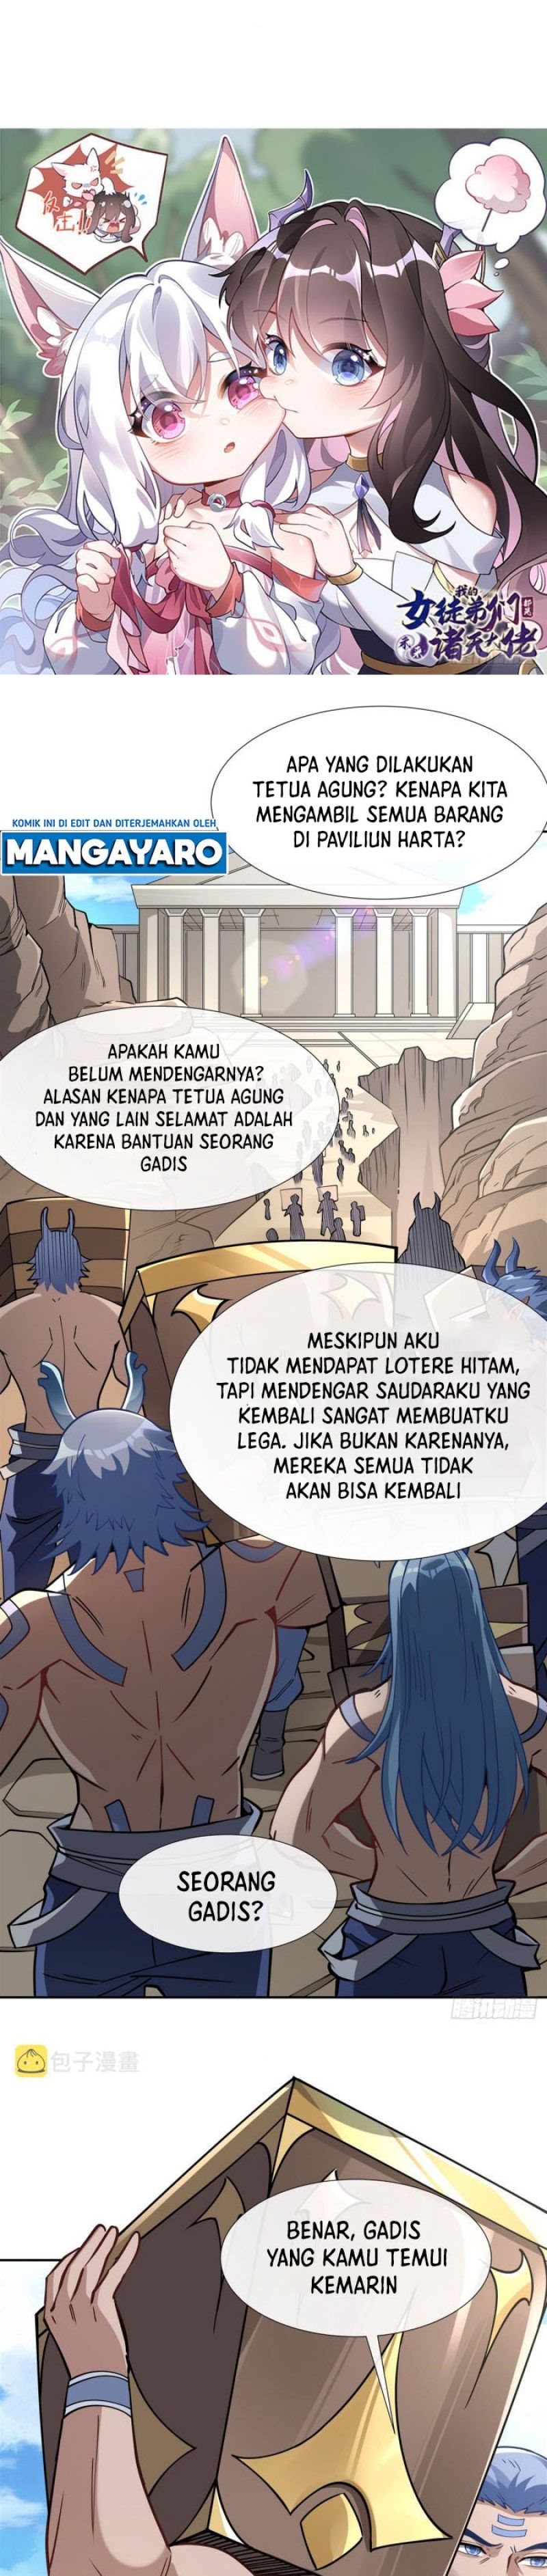 Dilarang COPAS - situs resmi www.mangacanblog.com - Komik my female apprentices are all big shots from the future 127 - chapter 127 128 Indonesia my female apprentices are all big shots from the future 127 - chapter 127 Terbaru 4|Baca Manga Komik Indonesia|Mangacan